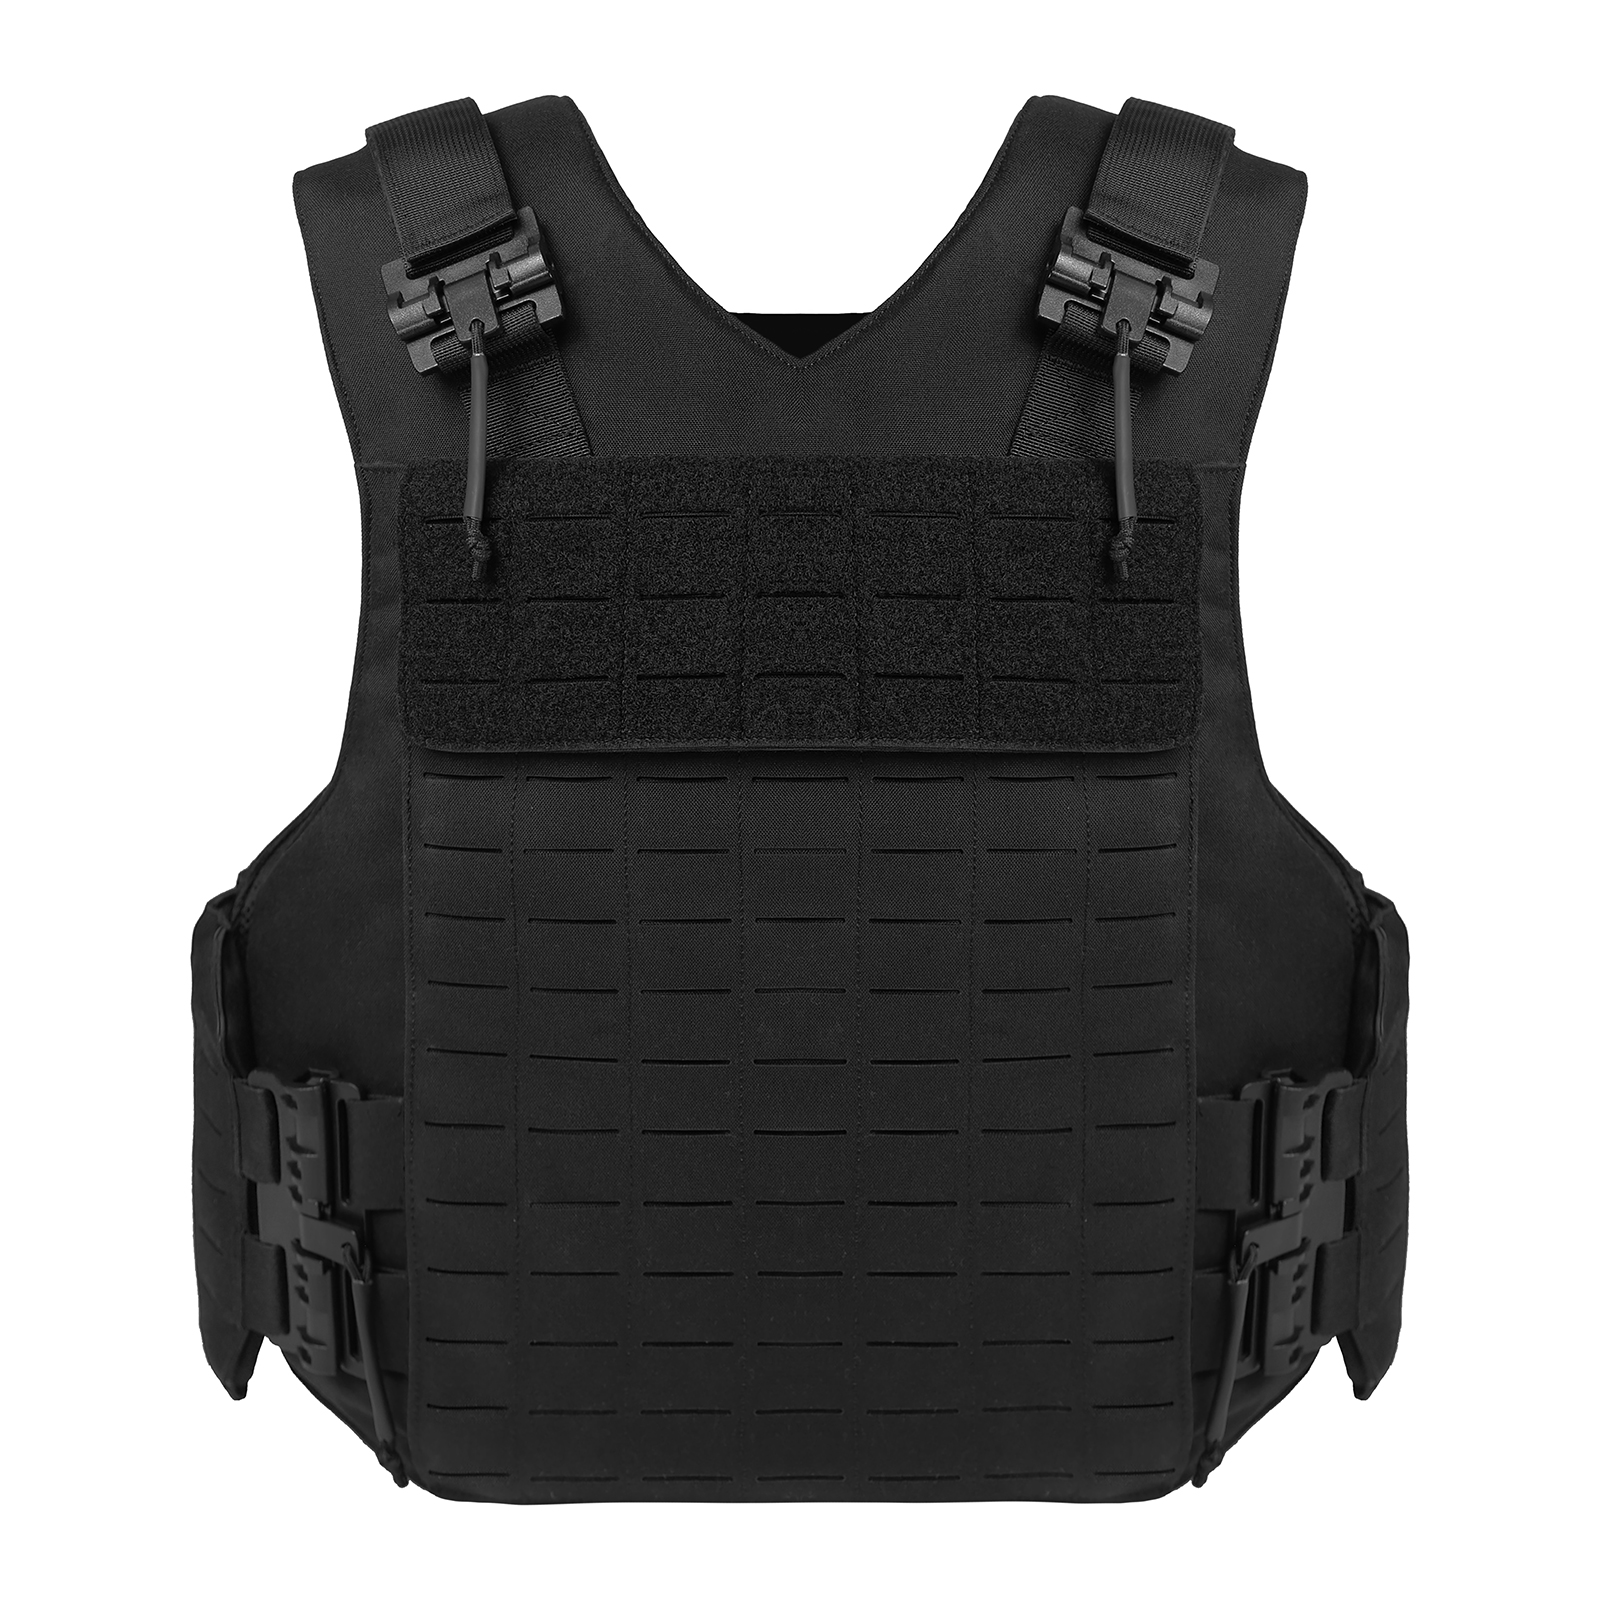 Lixada Breathable Tactical Vest Outdoor Quick Disassembly CS Field Protection US 